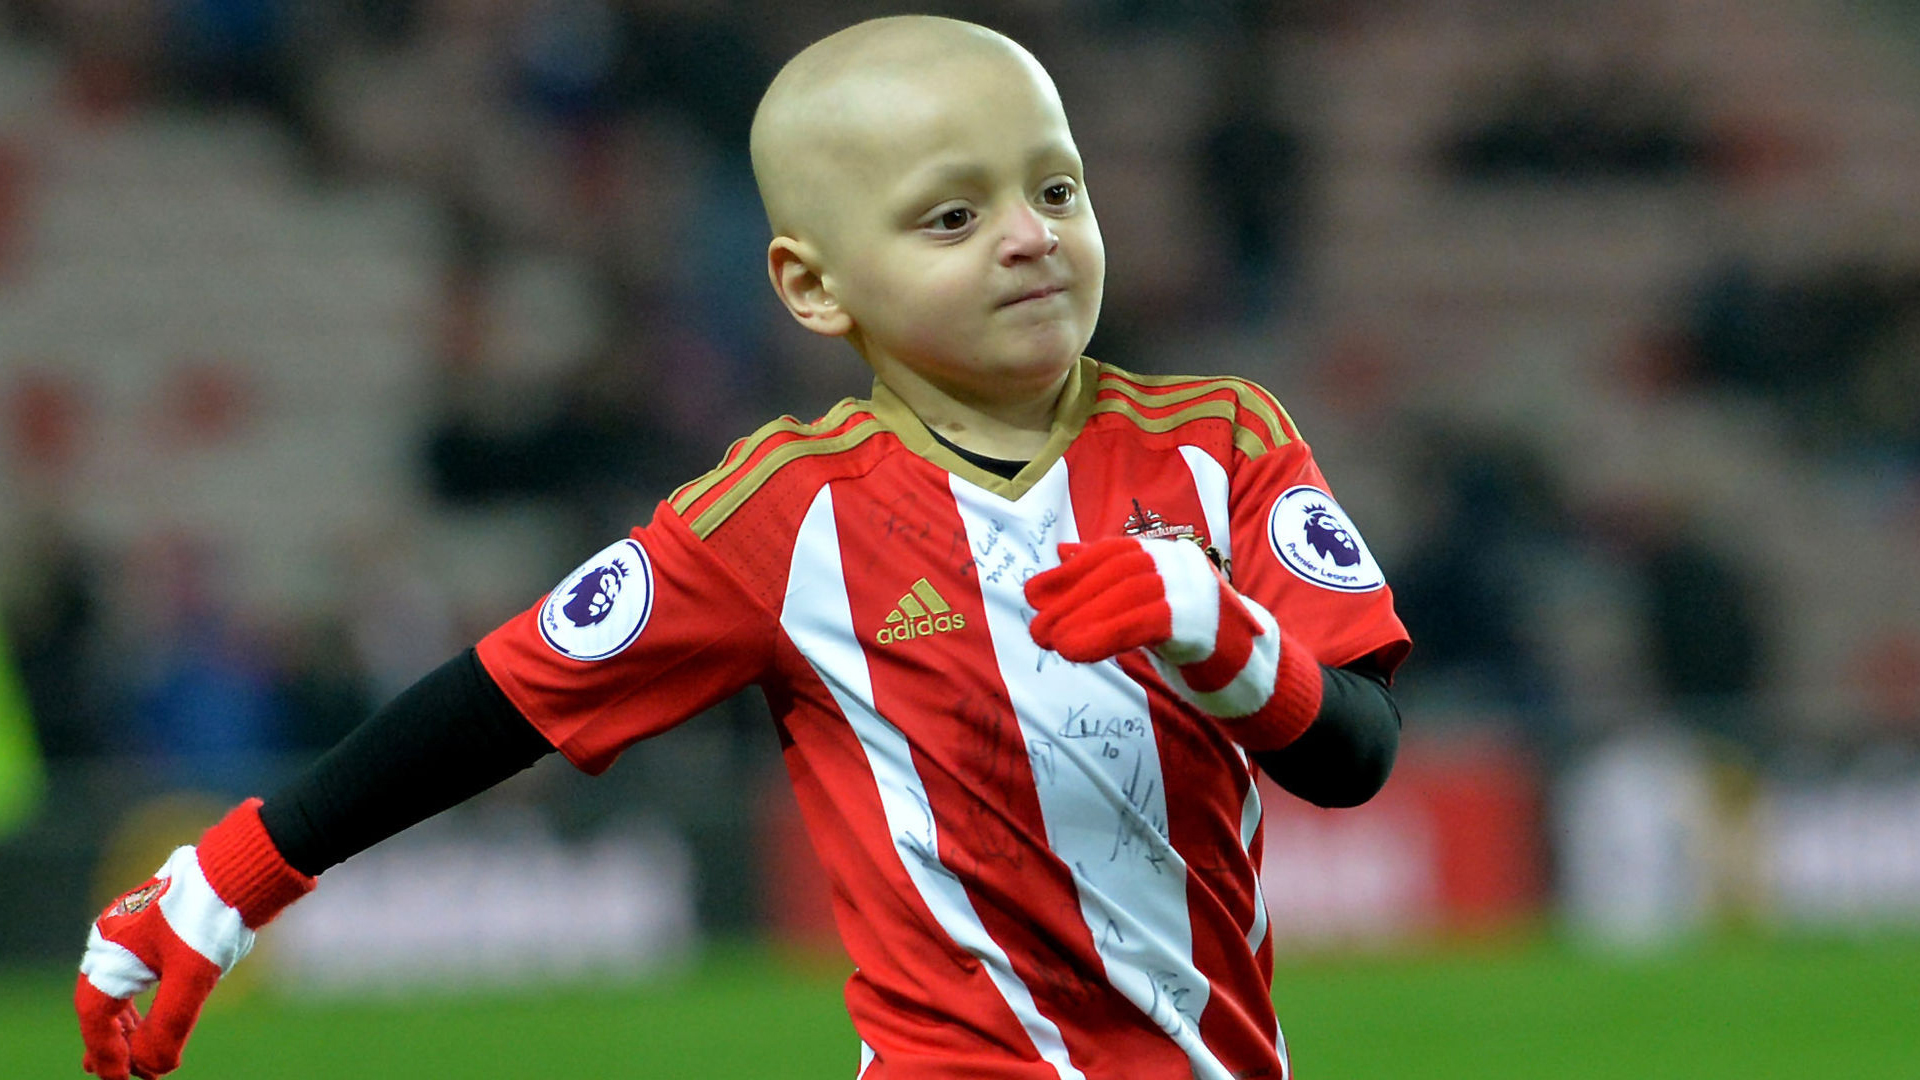 Bradley Lowery Cause Of Death, Bio, Age, Family, Net Worth, Height, Relationship & More